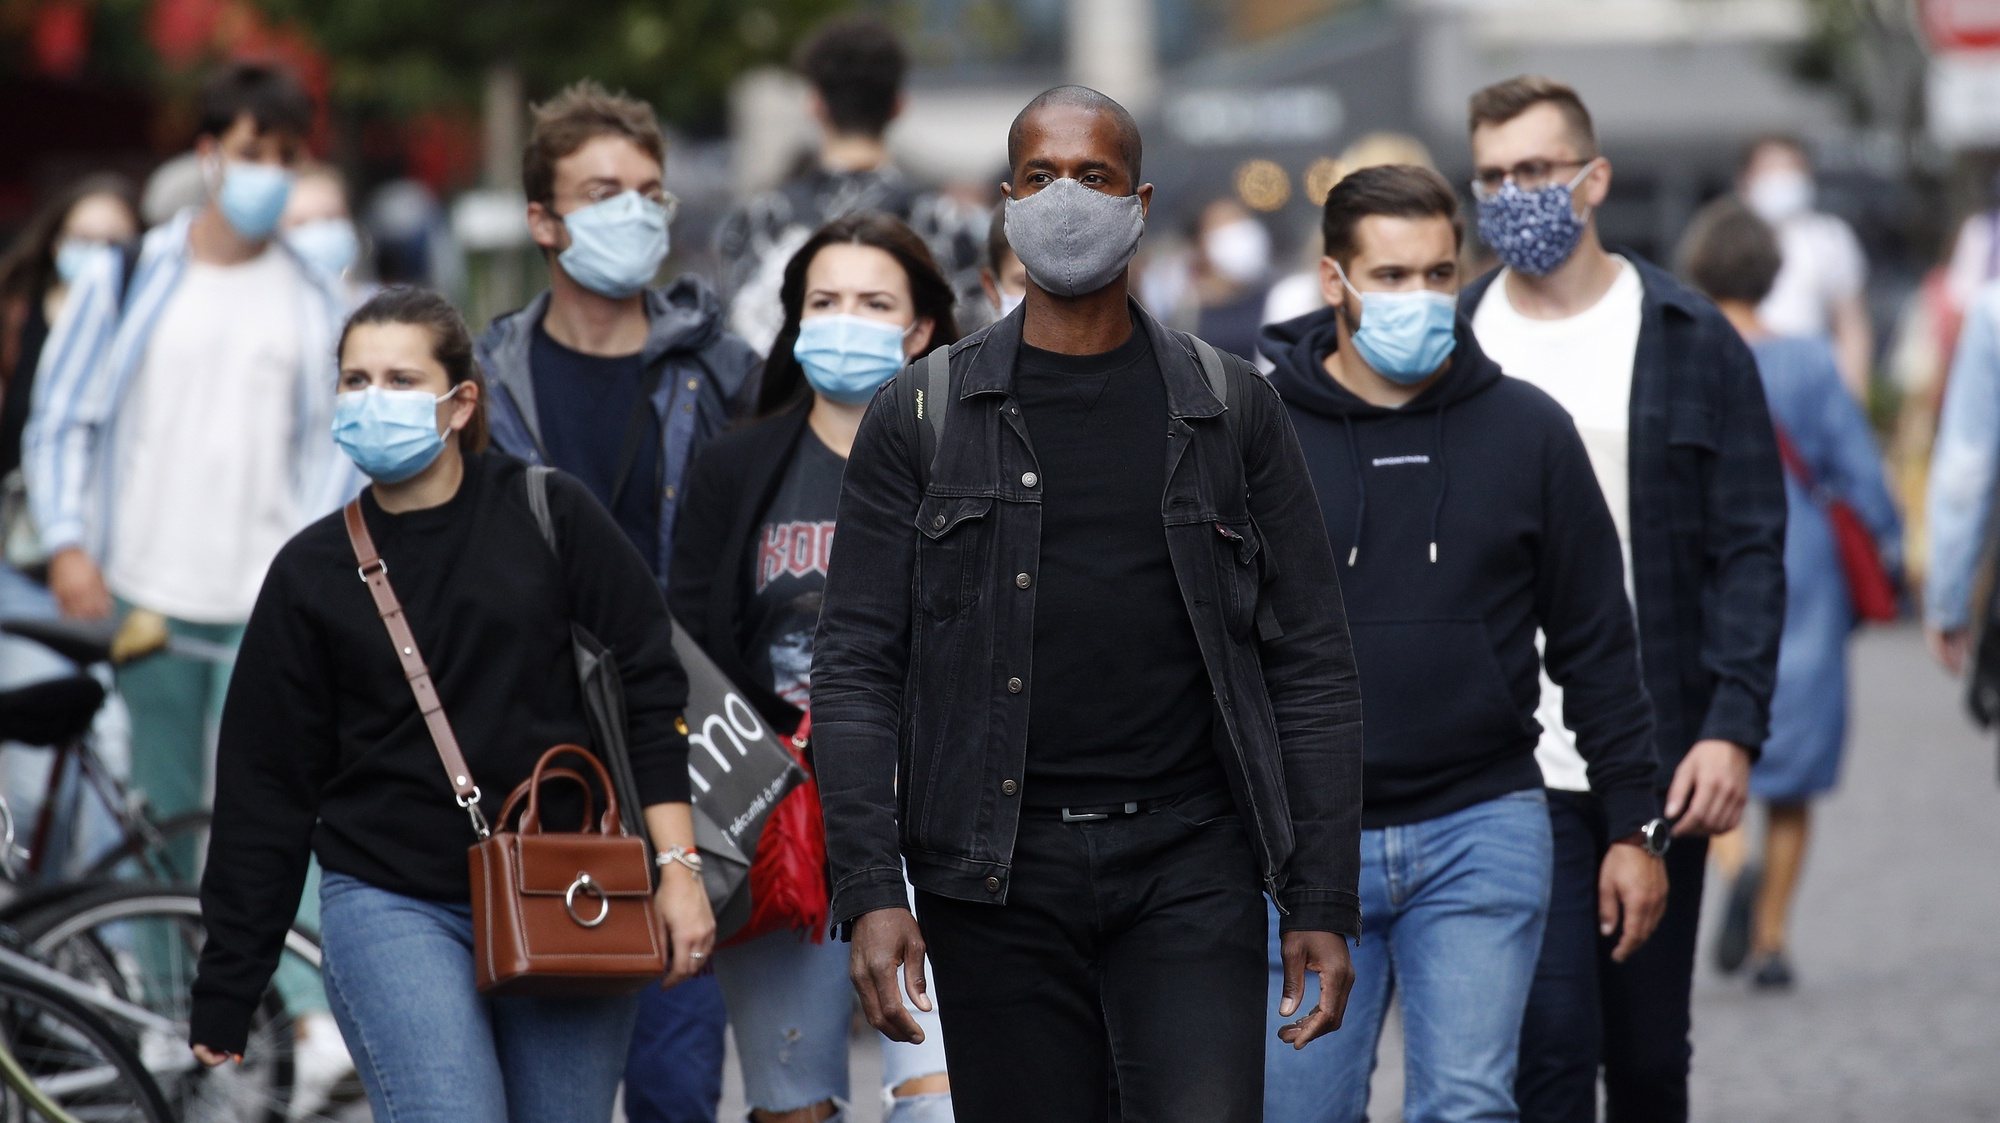 epa08632225 People wearing protective face masks walk in the streets in Paris, France, 28 August 2020. As of 8am on 28 August, protective face masks are mandatory across the city of Paris, a measure annouced by French Prime Minister Jean Castex on 27 August to fight the rising spread of coronavirus SARS-CoV-2 which causes the Covid-19 disease. Cases in France have surged in recent weeks, with over 6000 new cases recorded in a 24 hour period.  EPA/YOAN VALAT